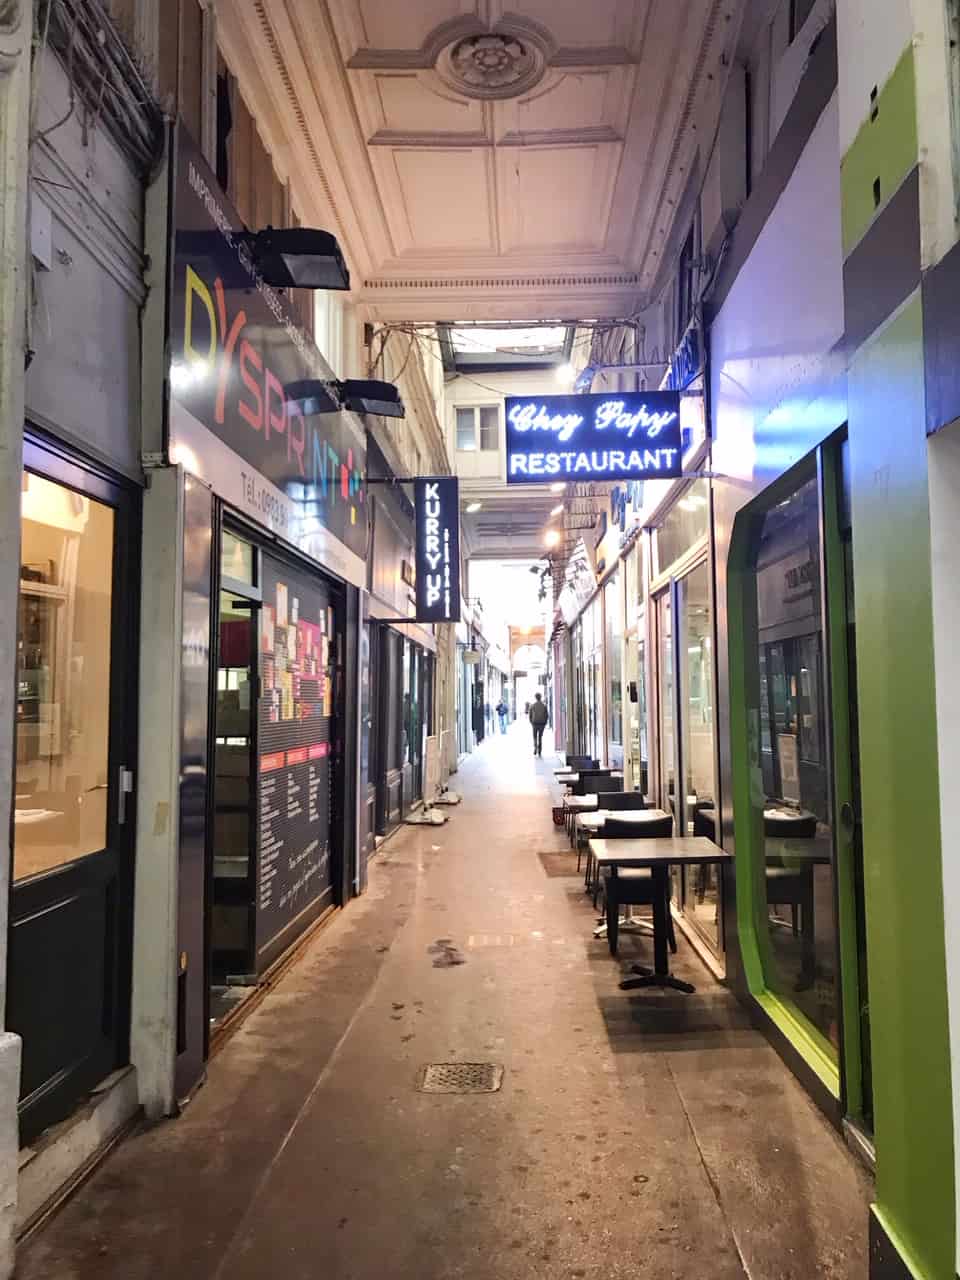 Passage du Ponceau is the covered passage where the locals go in Paris